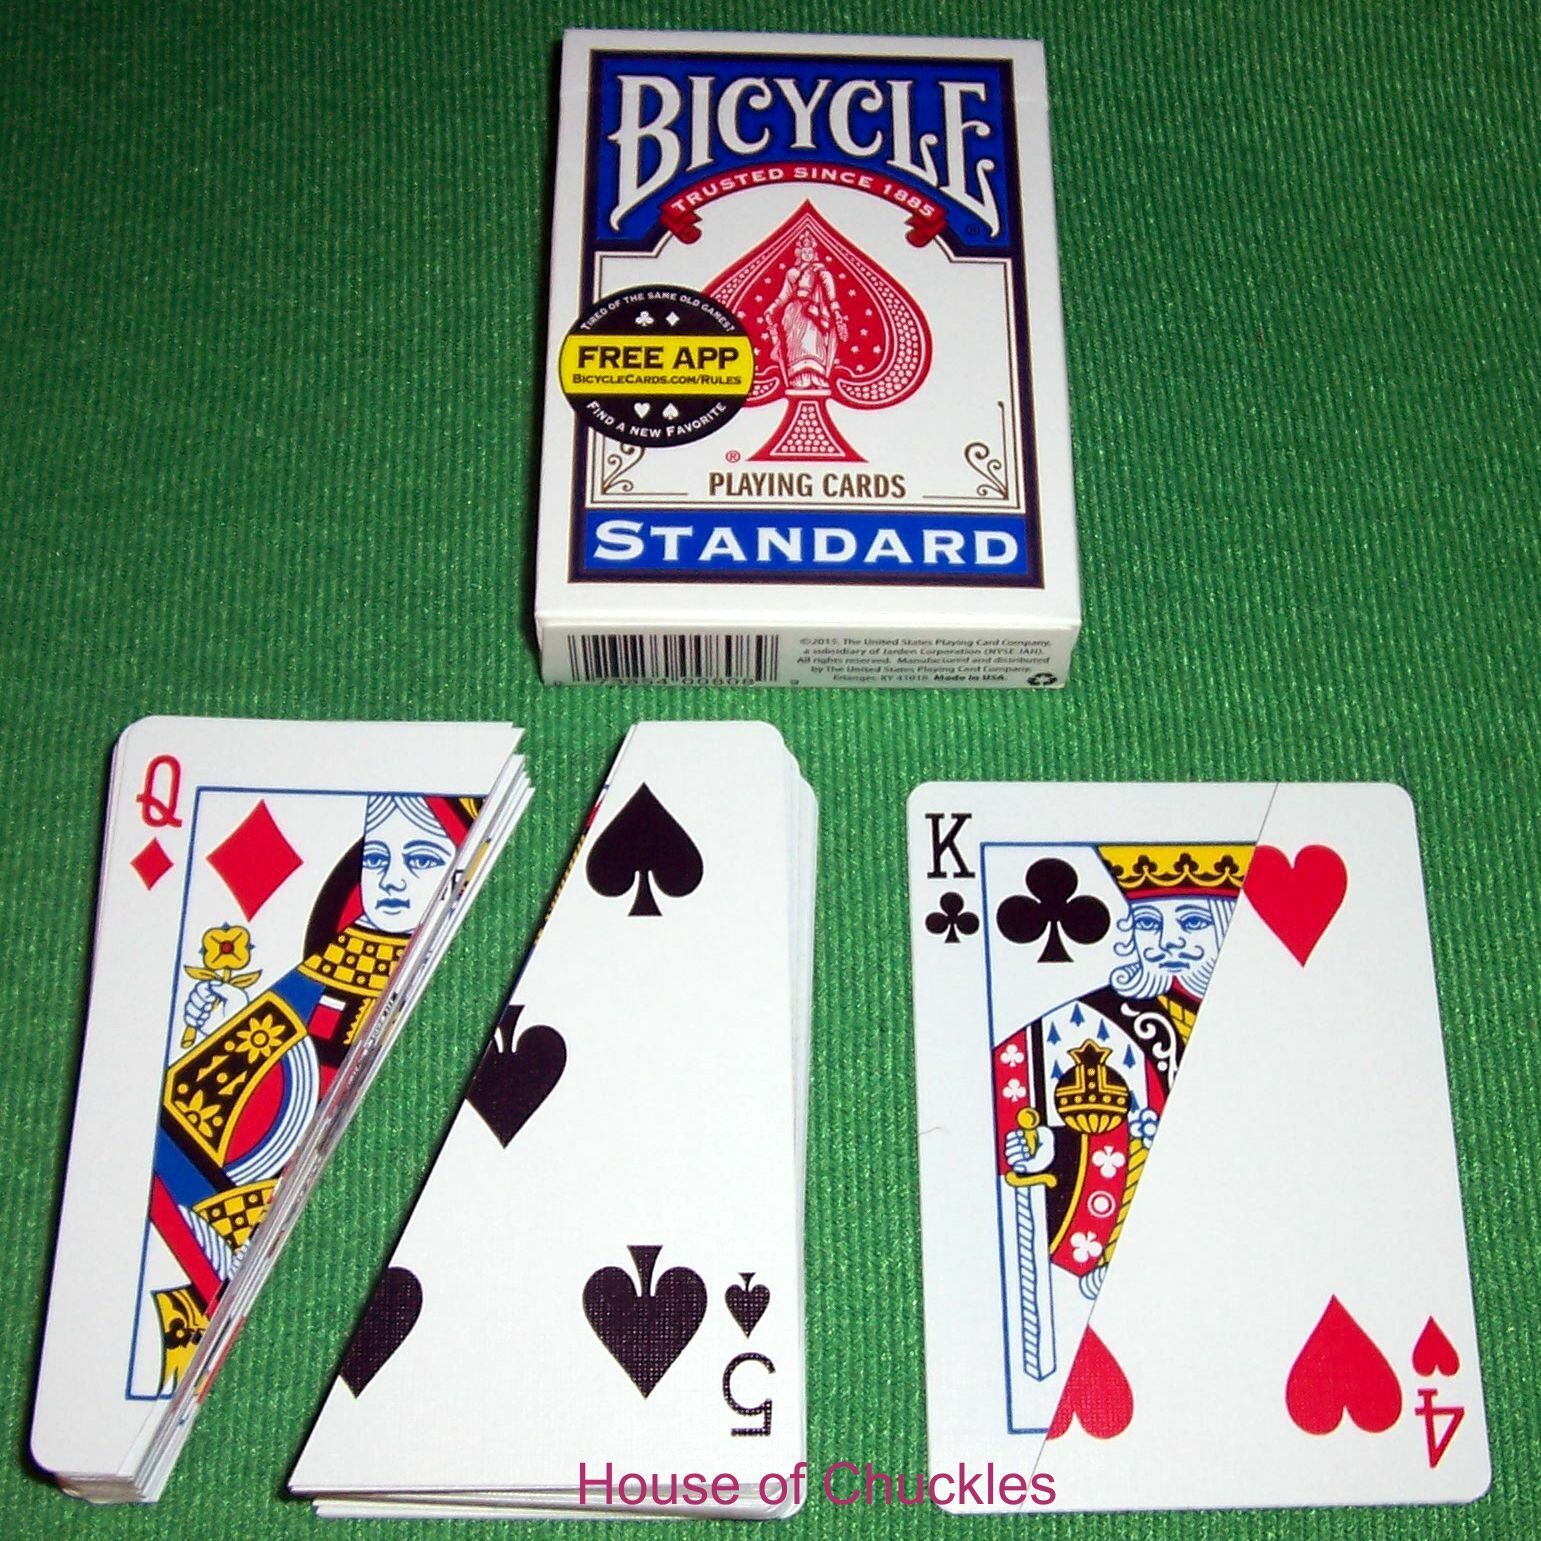 Comedy Split Deck - Blue Bicycle Back - Magic Playing Card Trick